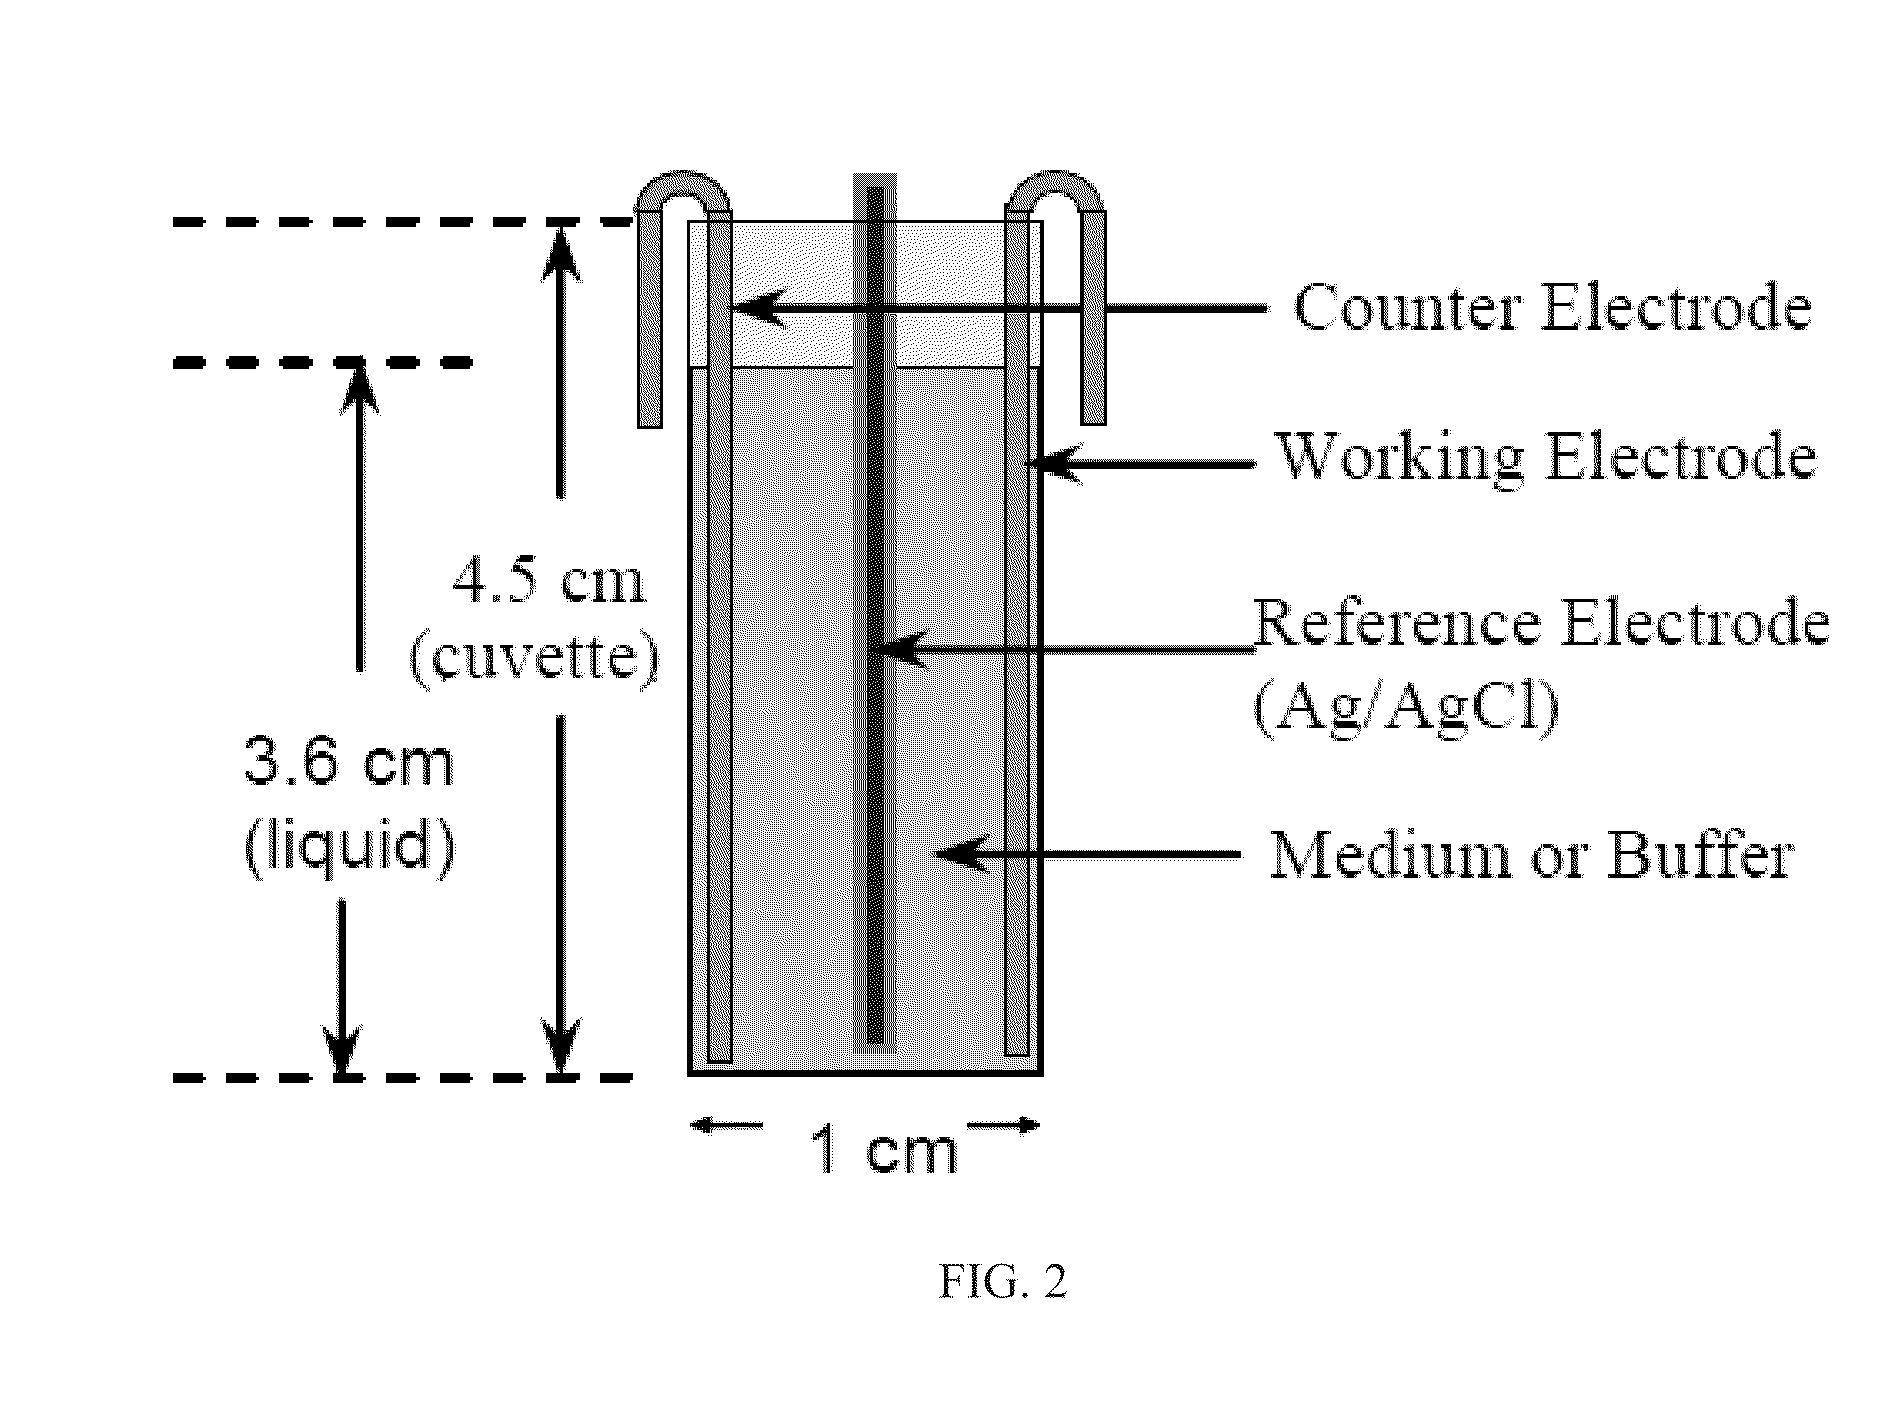 System and method for controlling bacterial persister cells with weak electric currents